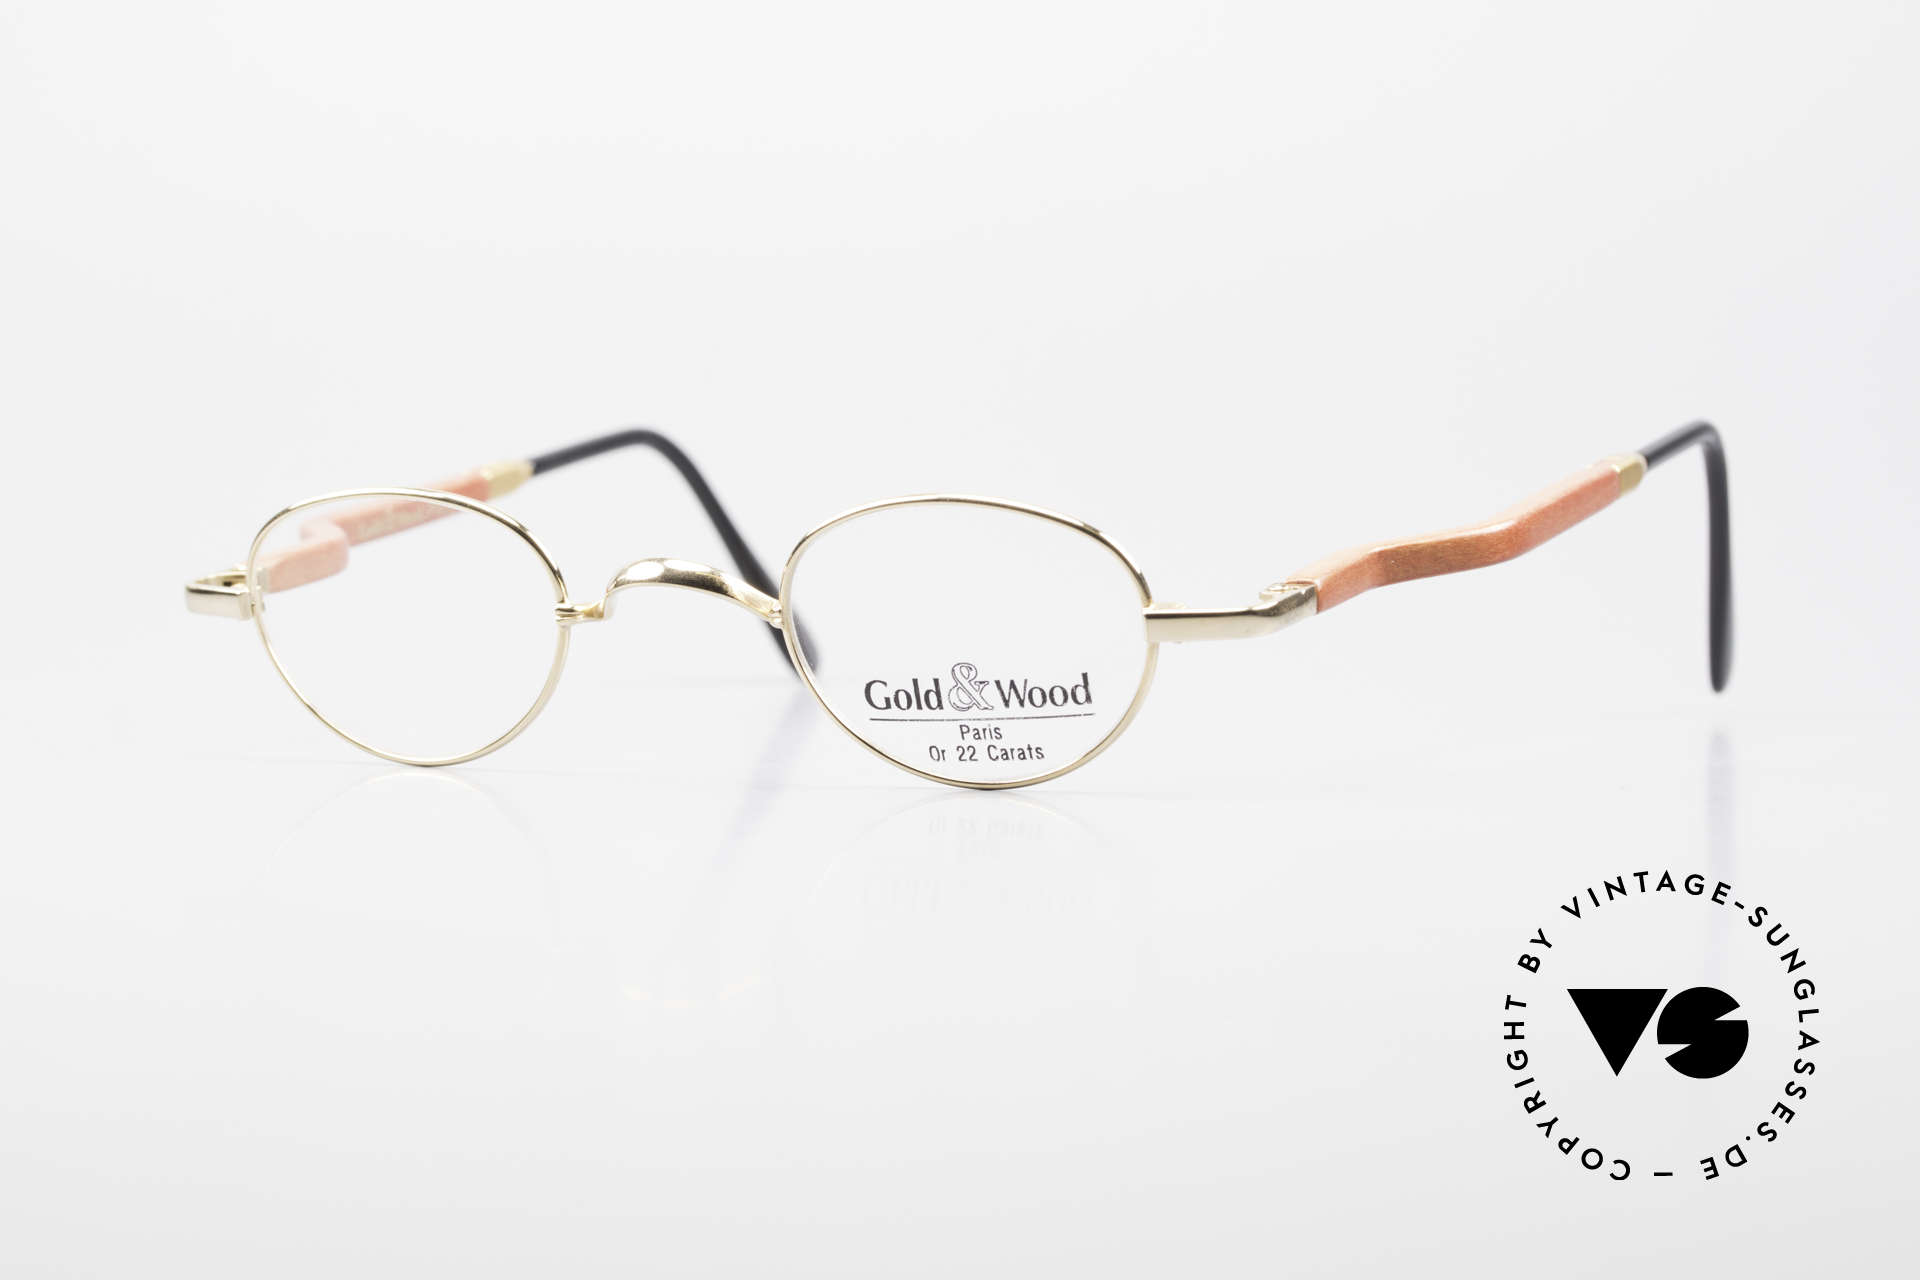 Gold & Wood 326 Wood Frame 22ct Gold Plated, Gold & Wood Paris glasses, 326-53 in size 37-26, Made for Men and Women